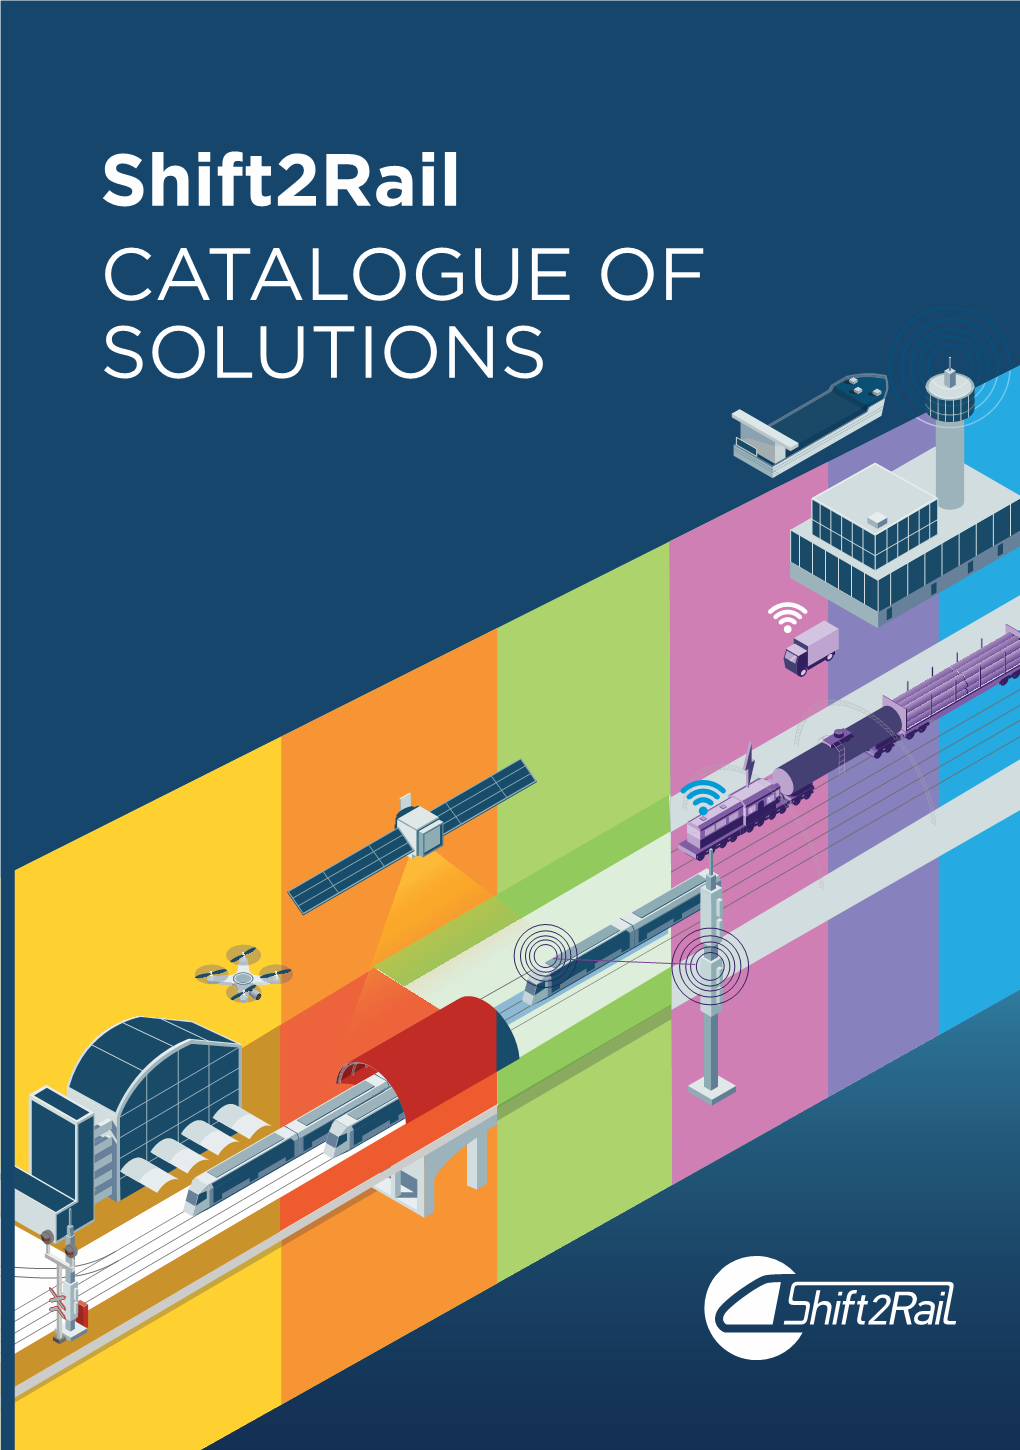 CATALOGUE of SOLUTIONS Manuscript Completed in August 2019